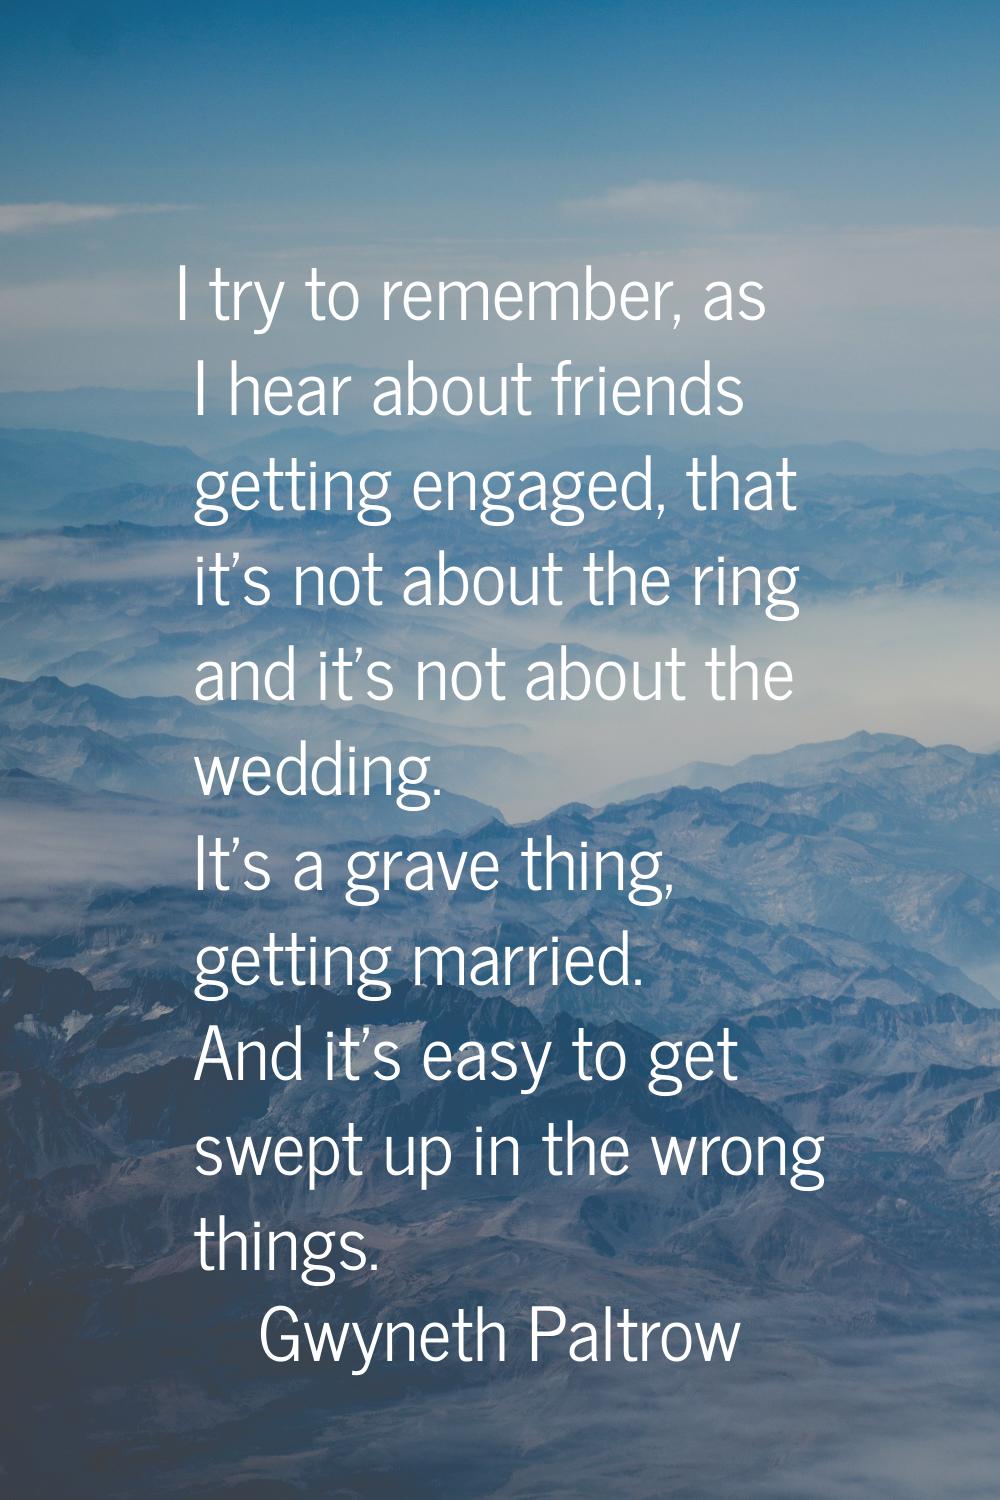 I try to remember, as I hear about friends getting engaged, that it's not about the ring and it's n